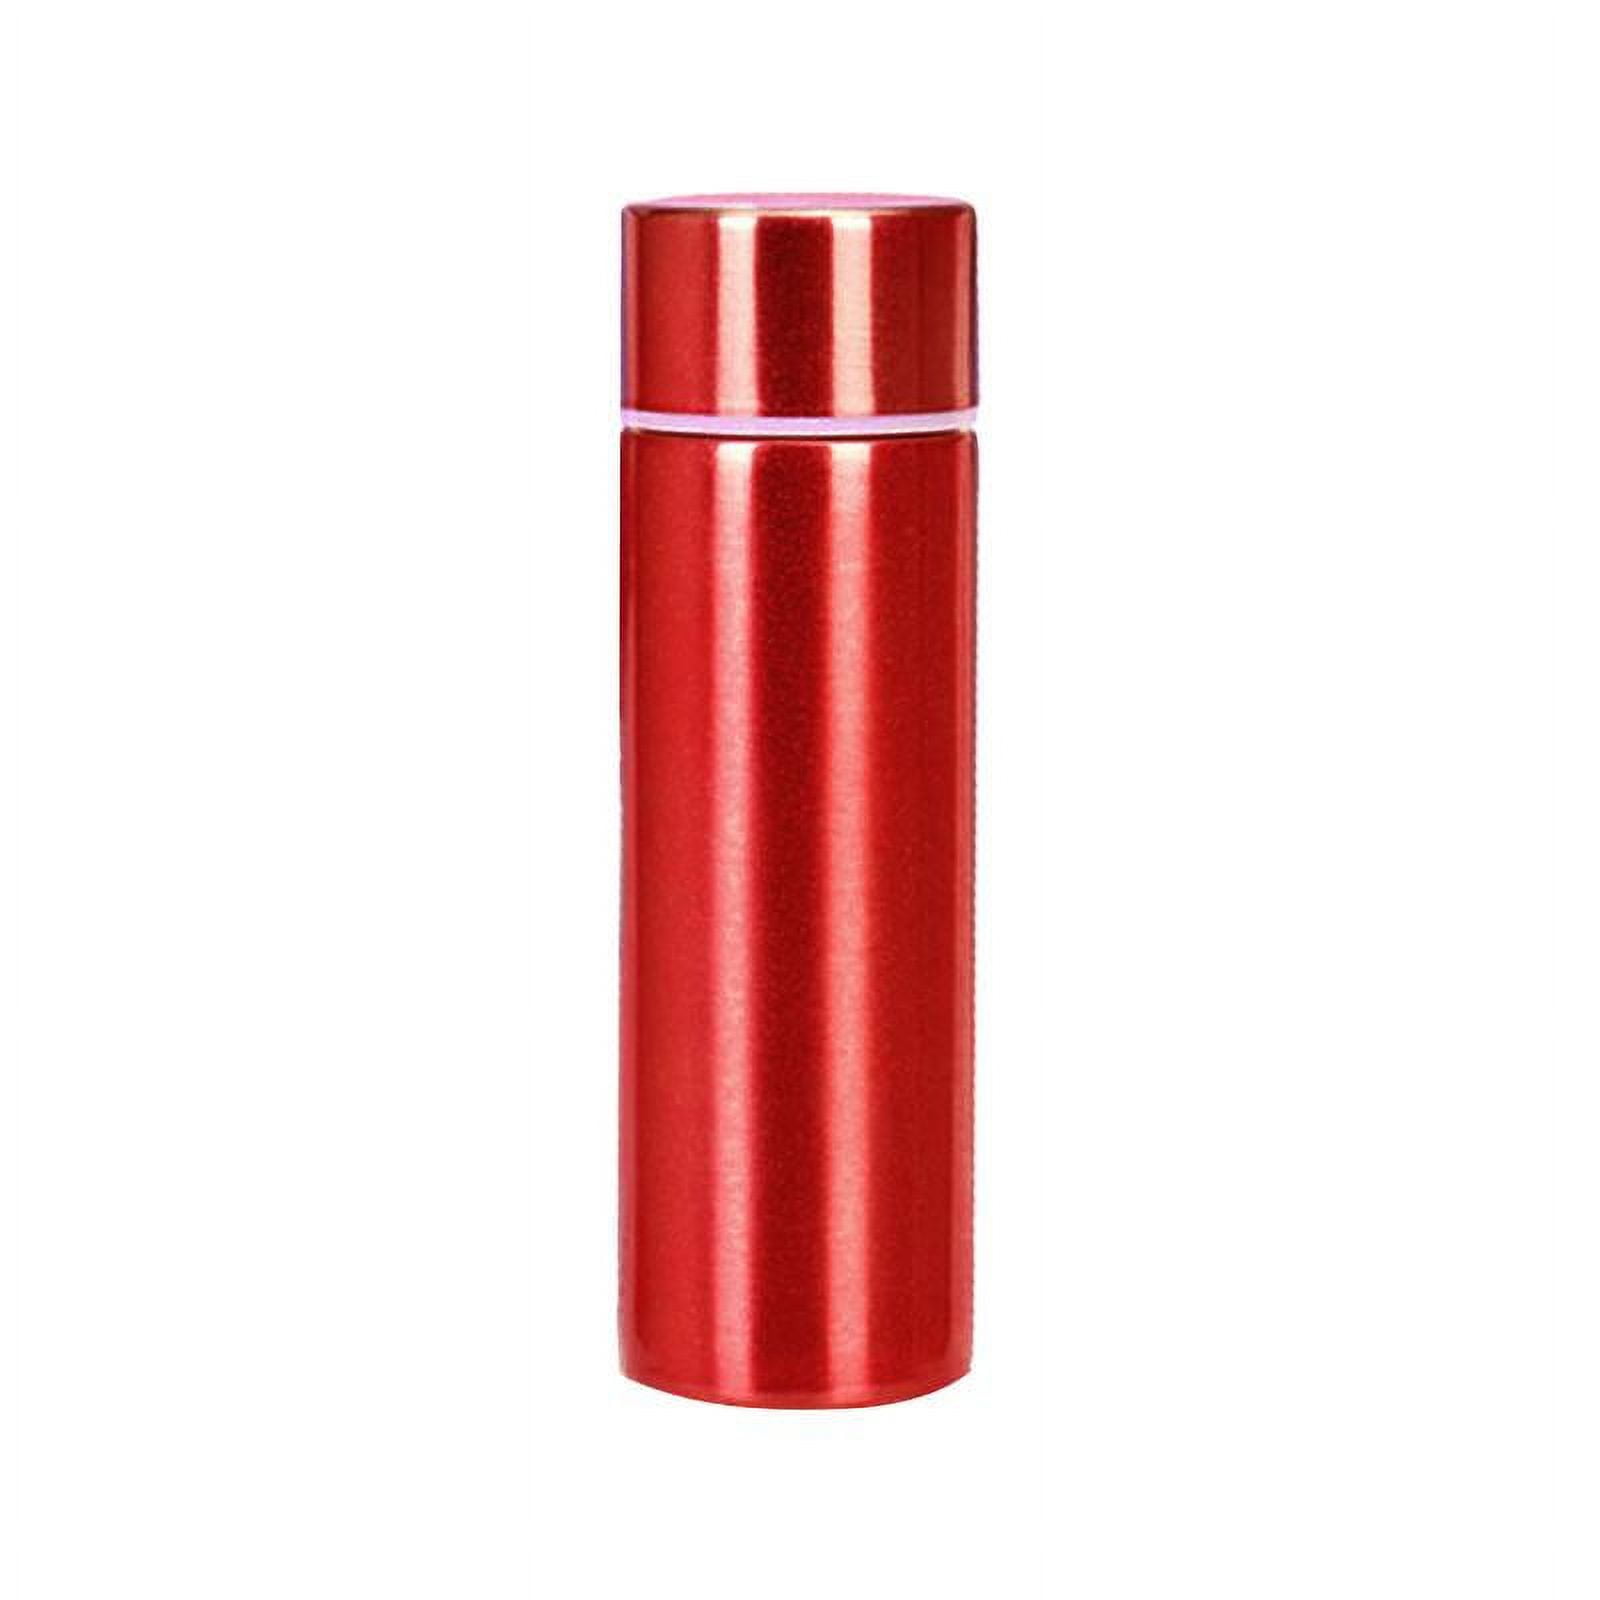 Coffee Thermos Cup European Light Luxury Tumbler Stainless Steel Portable  Convenient Cup Small Essence Net Red Coffee Cup